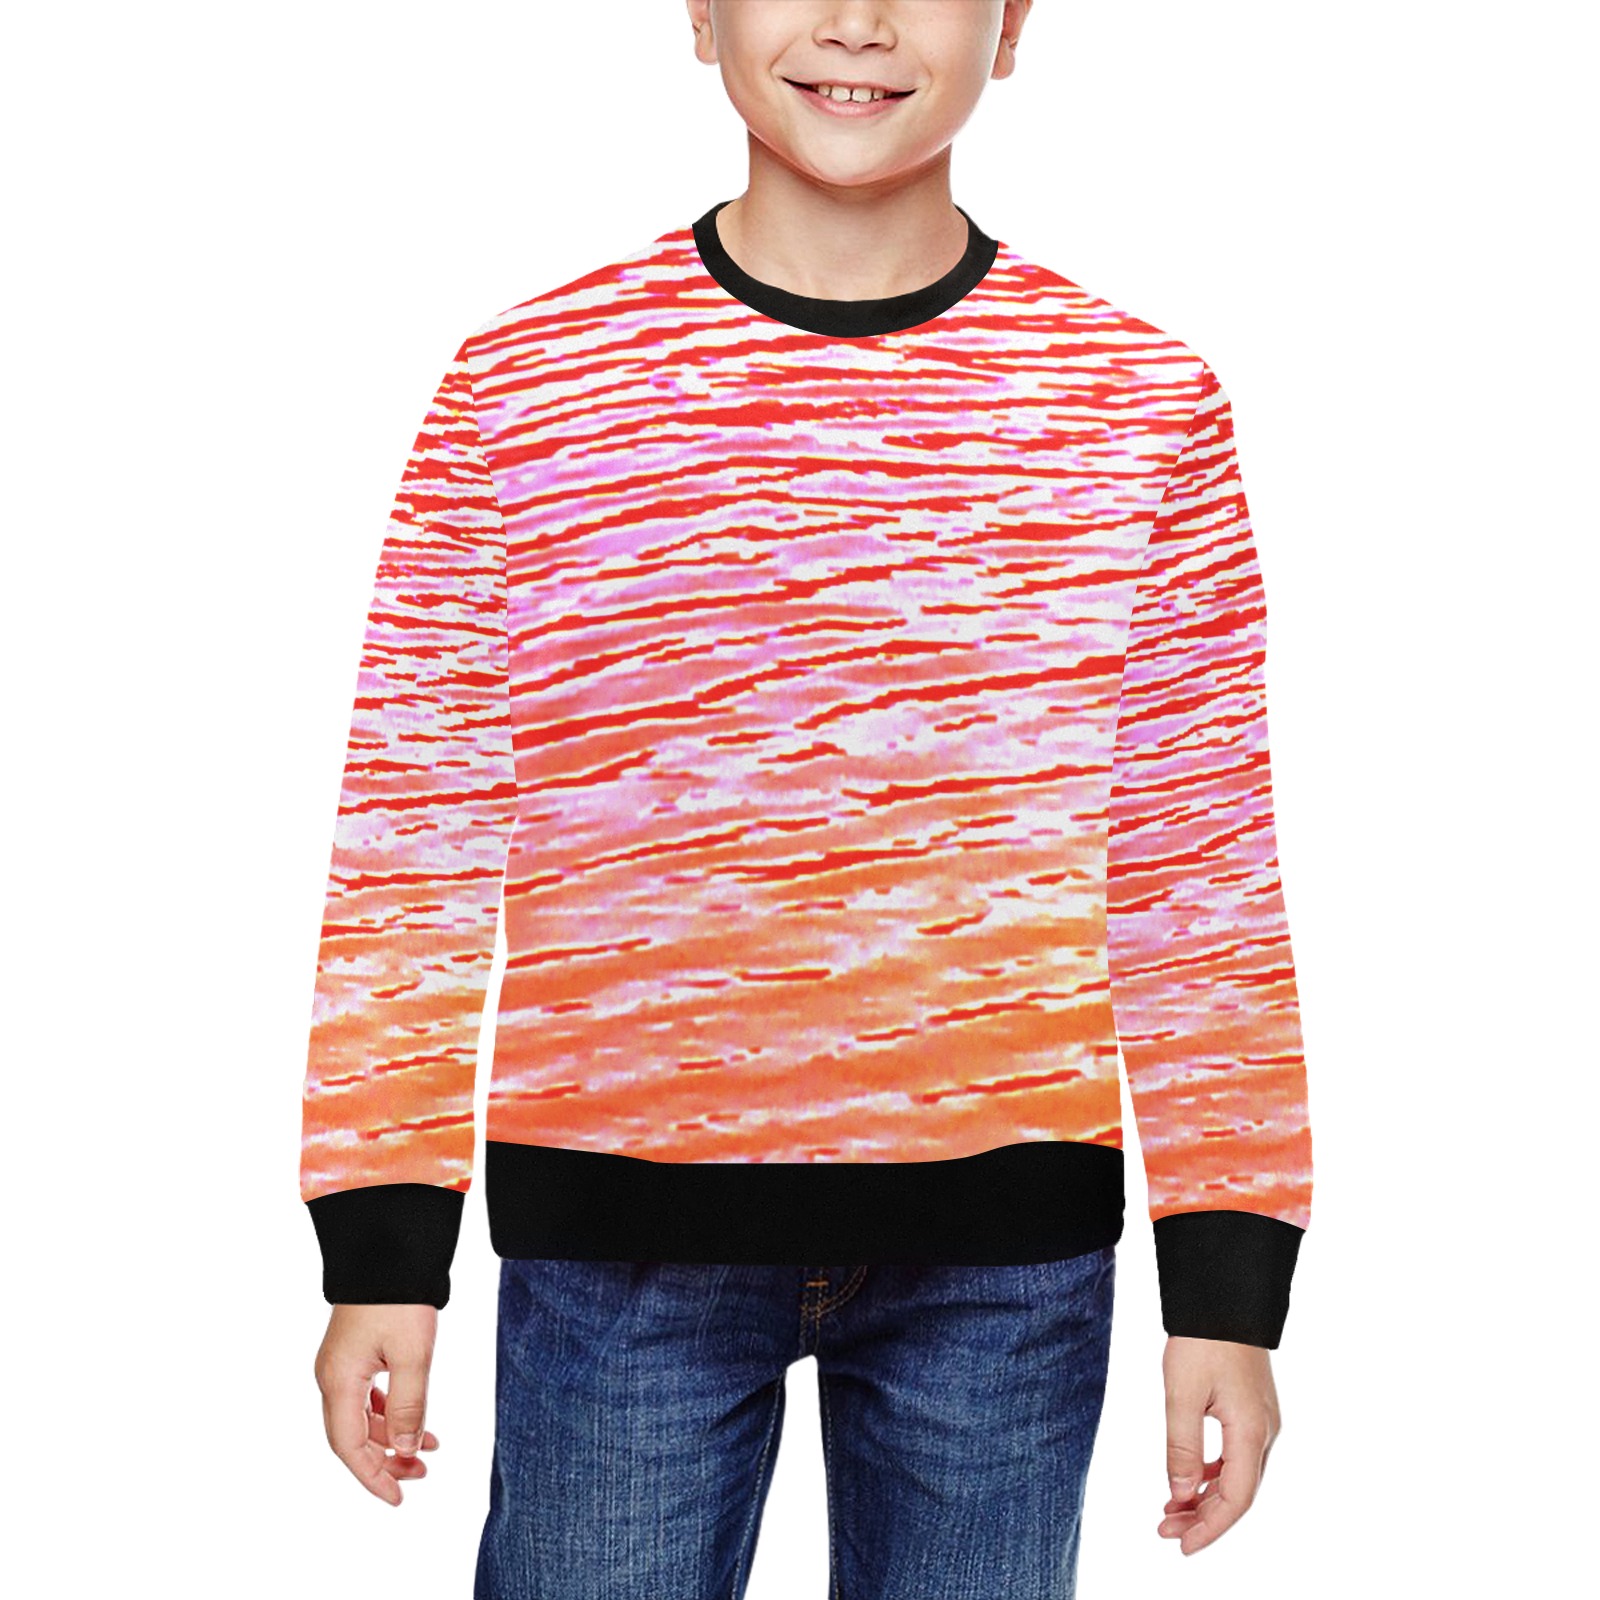 Orange and red water All Over Print Crewneck Sweatshirt for Kids (Model H29)